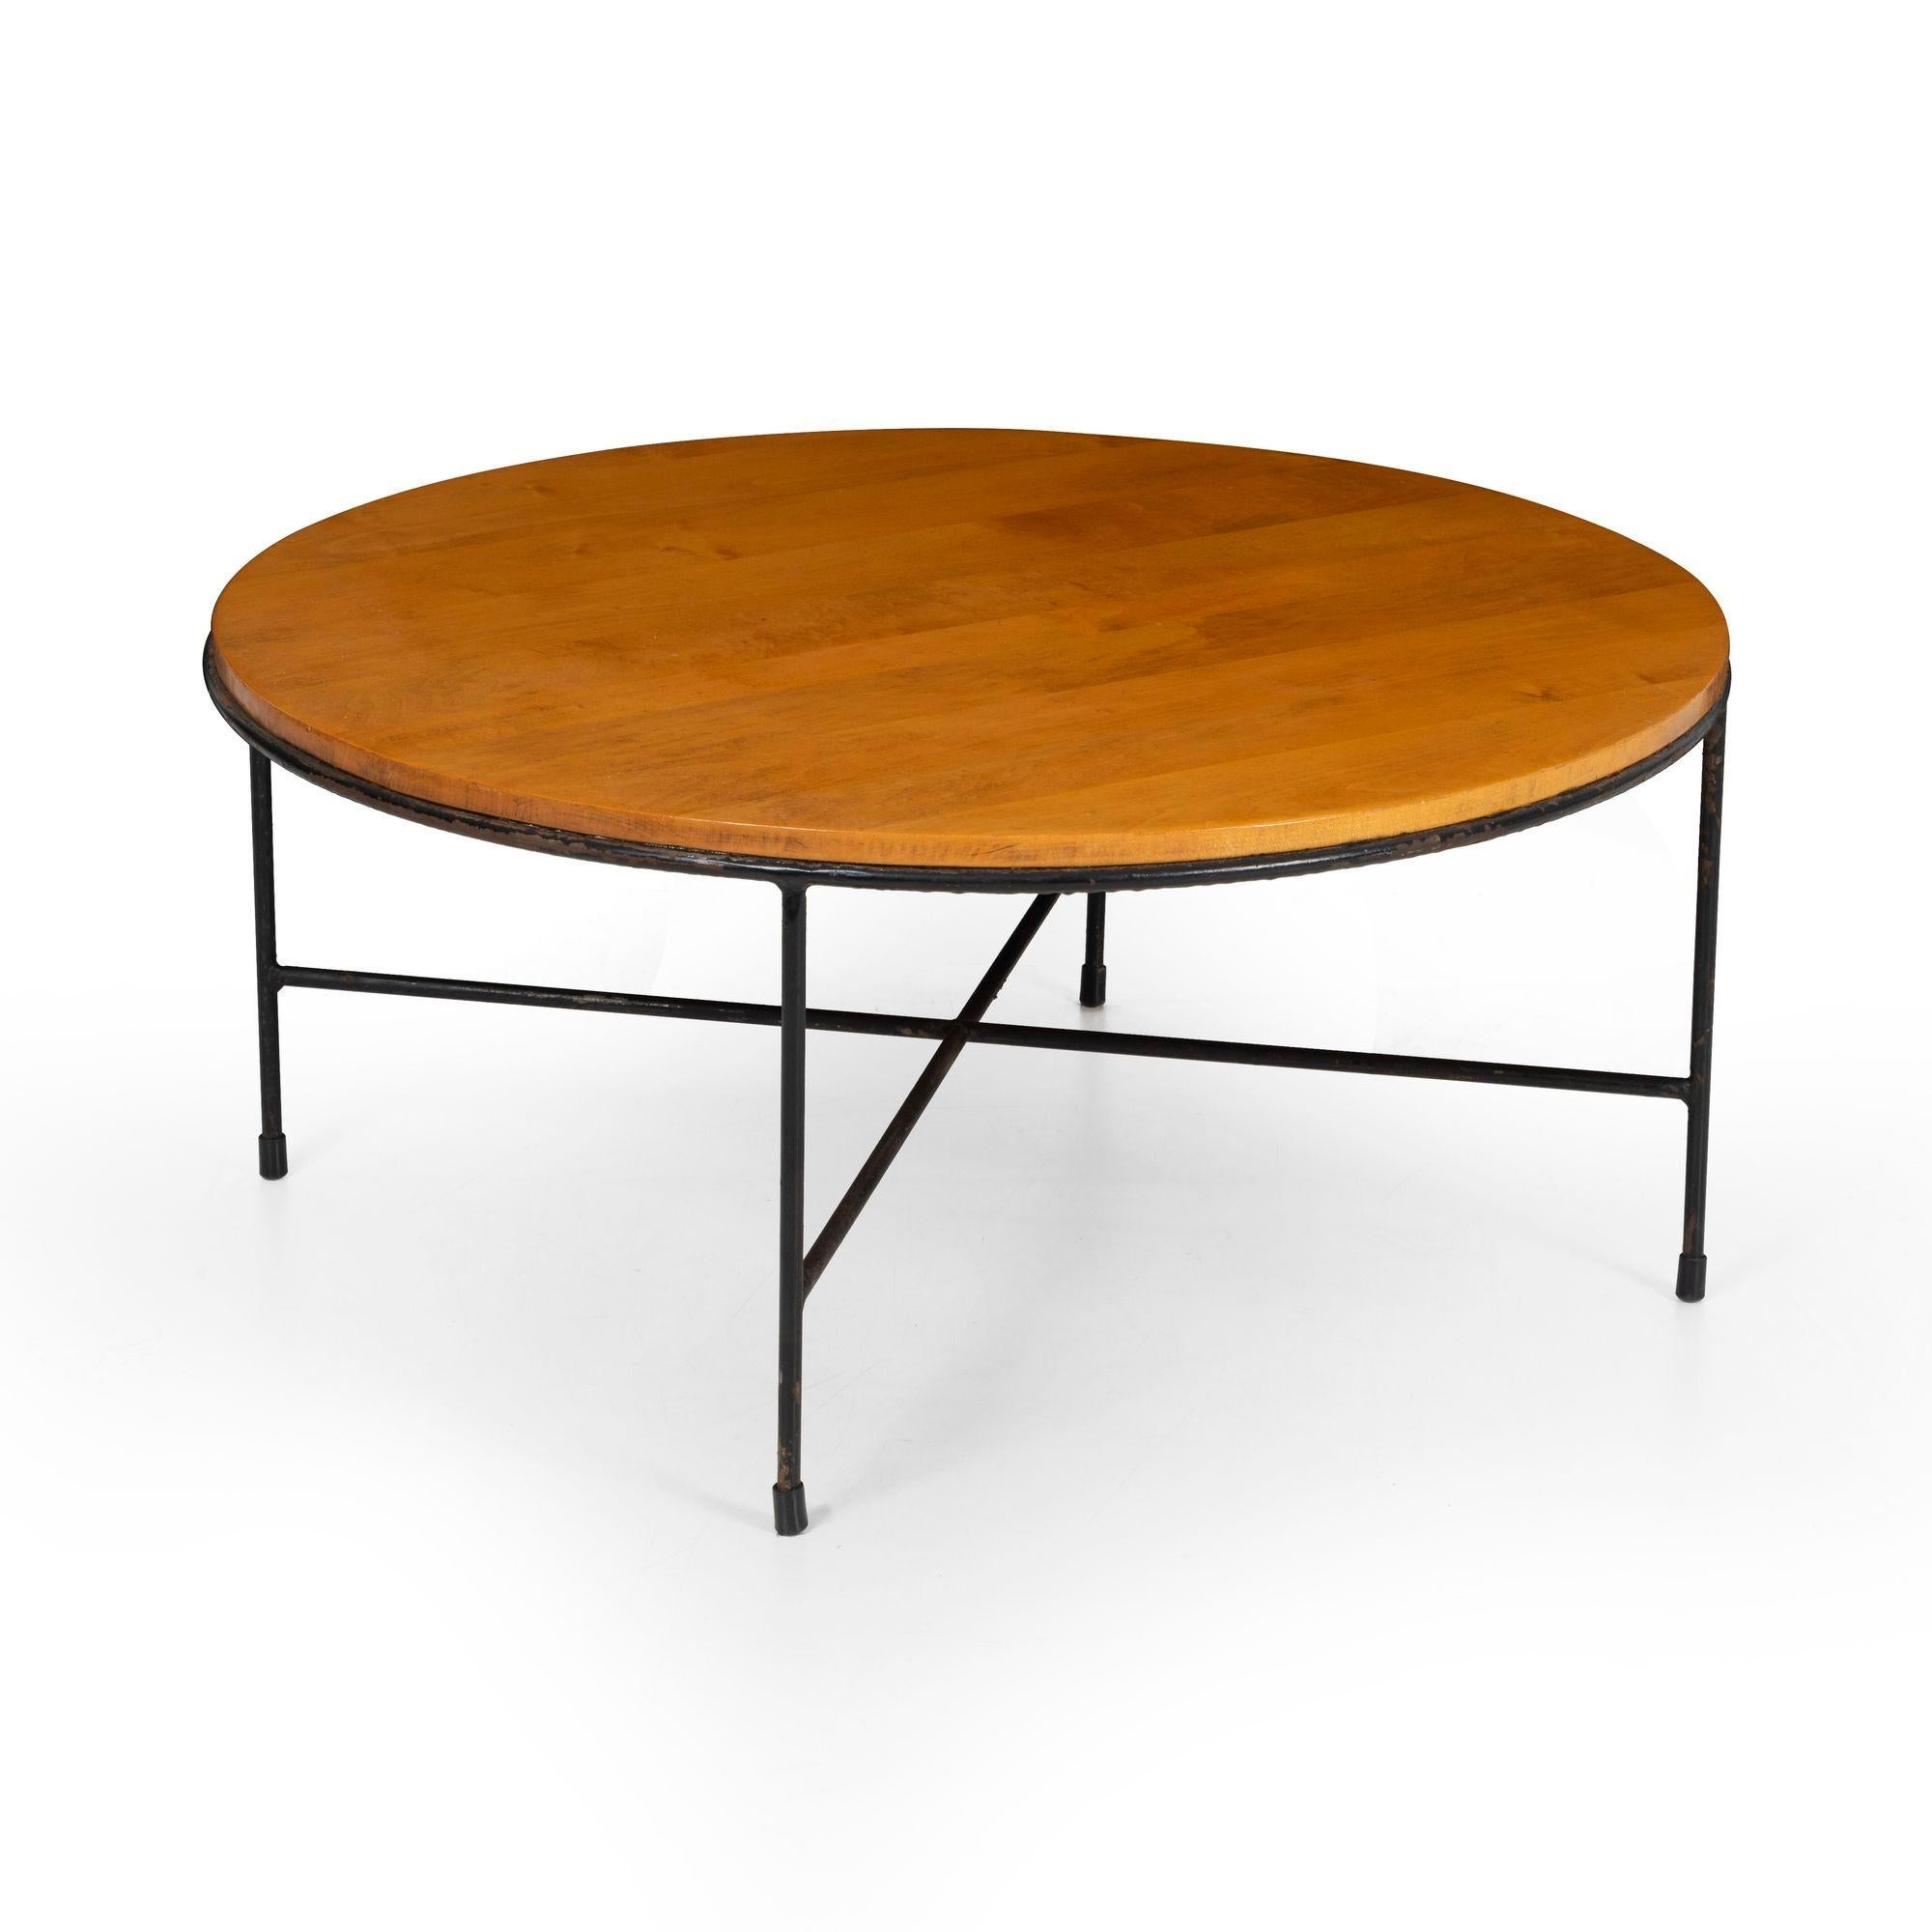 Paul McCobb Coffee Table, Planner Group by Winchendon 1950, Maple Top with Wrought Iron frame.
Signed on the underside, Paul McCobb